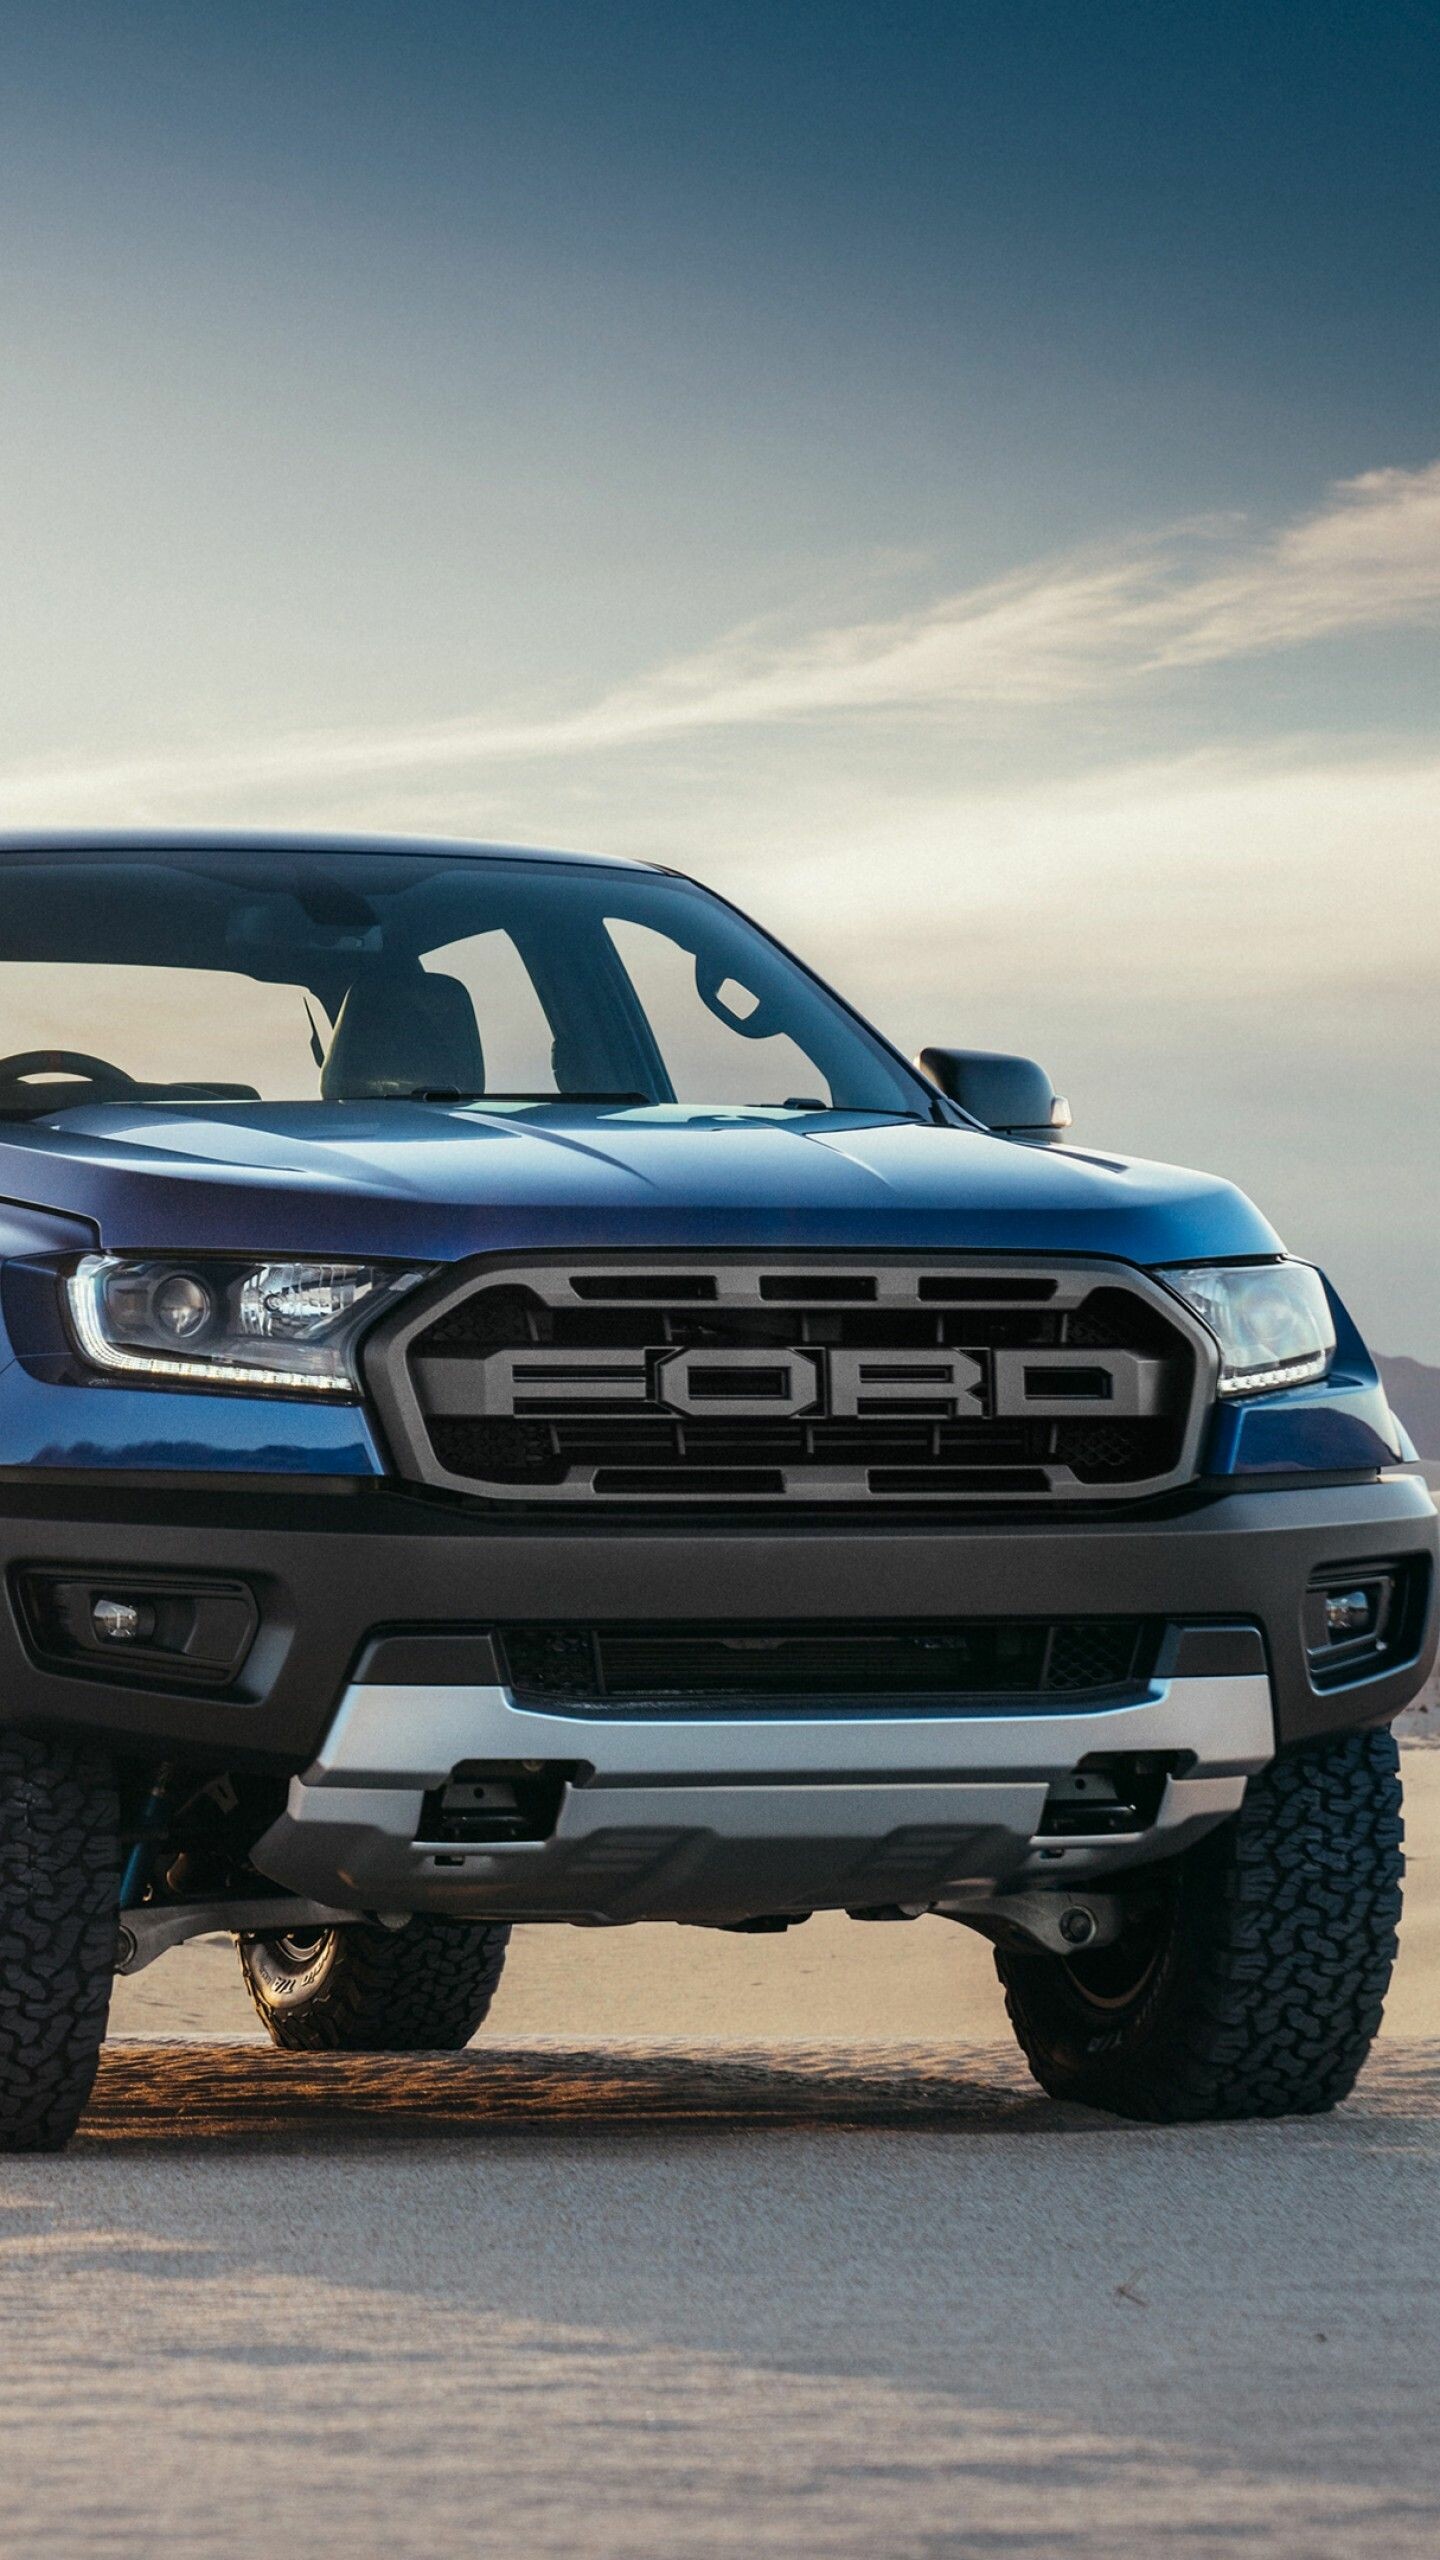 Ford: Ranger, A range of mid-size pickup trucks. 1440x2560 HD Background.